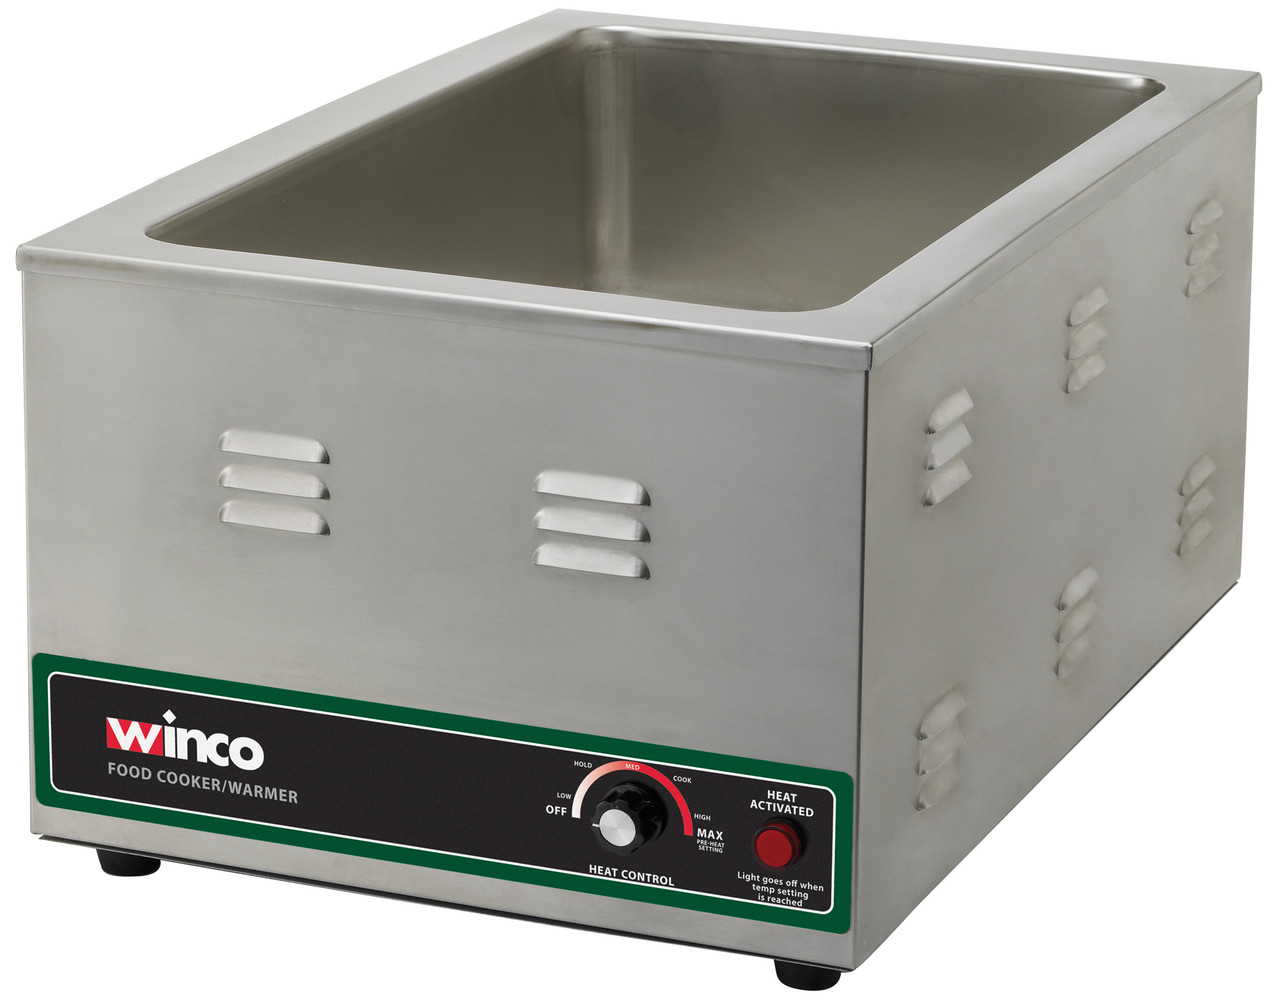 Winco Full-Size Food Cooker/Warmer, 20" x 12" Opening, Wet Well Us